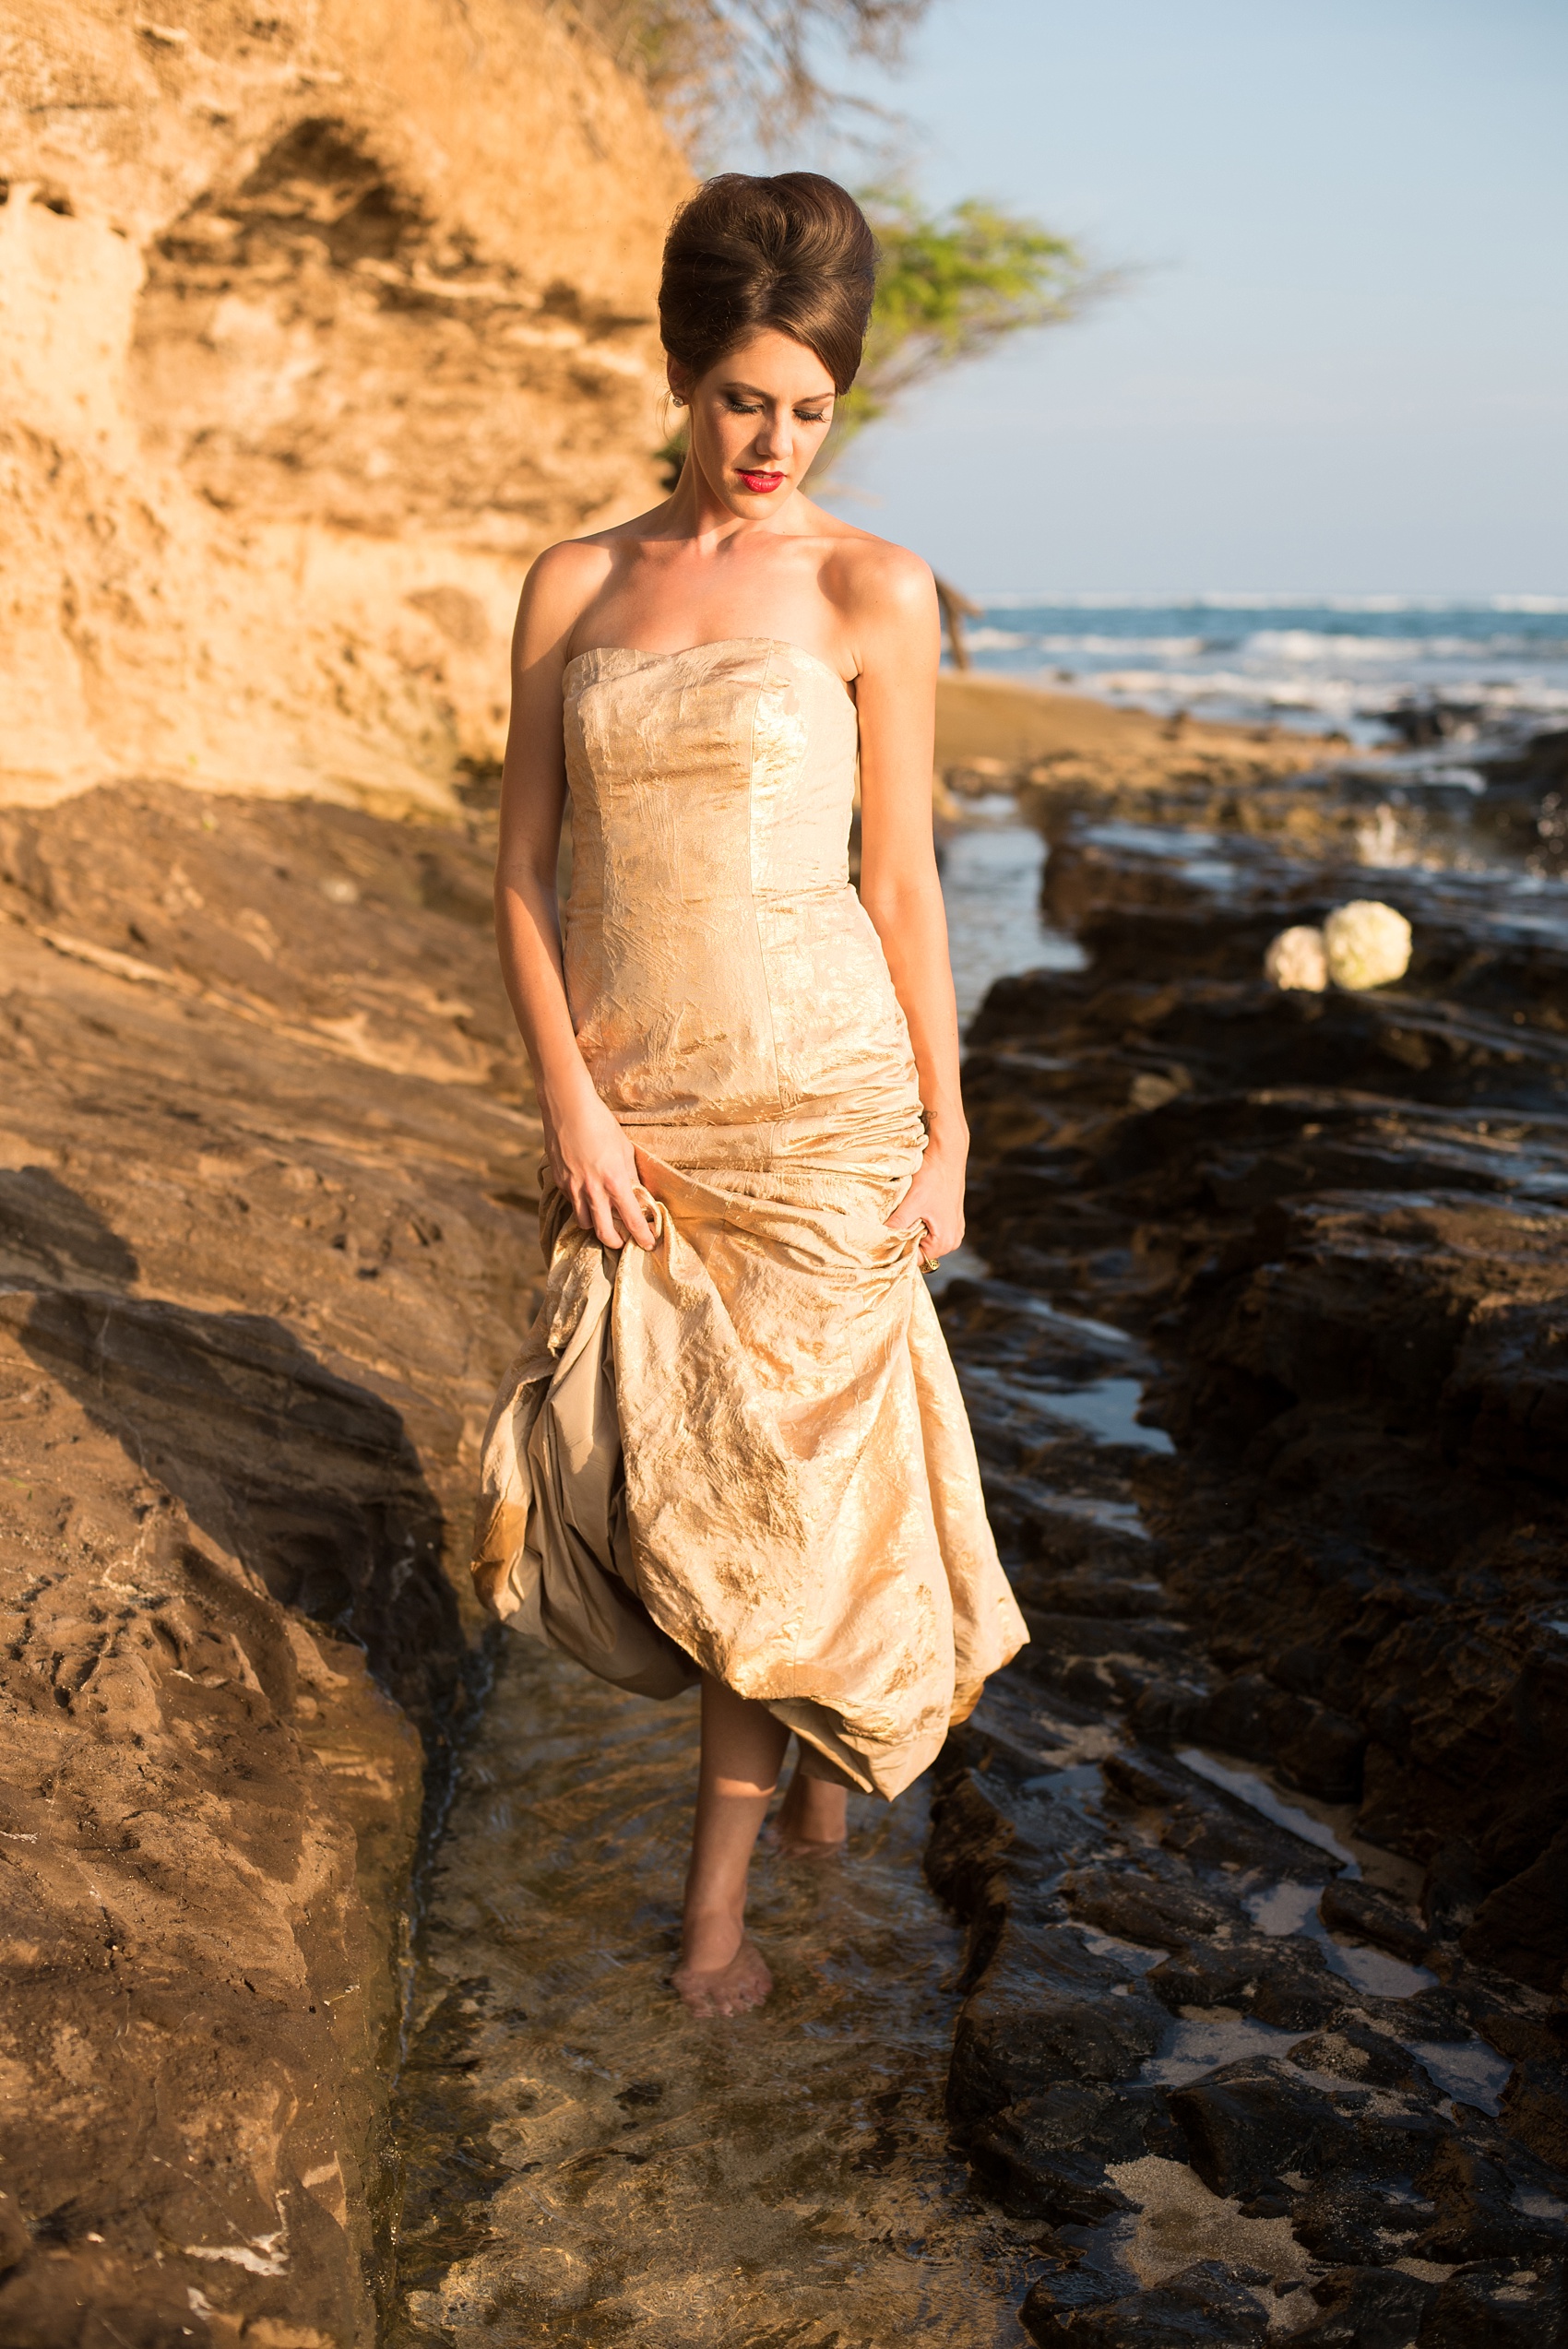 Mikkel Paige Photography photos of a bridal session on beach in Oahu. Golden hour bride with beehive up do and metallic gown. Rose pomanders filled the lava rock shore.